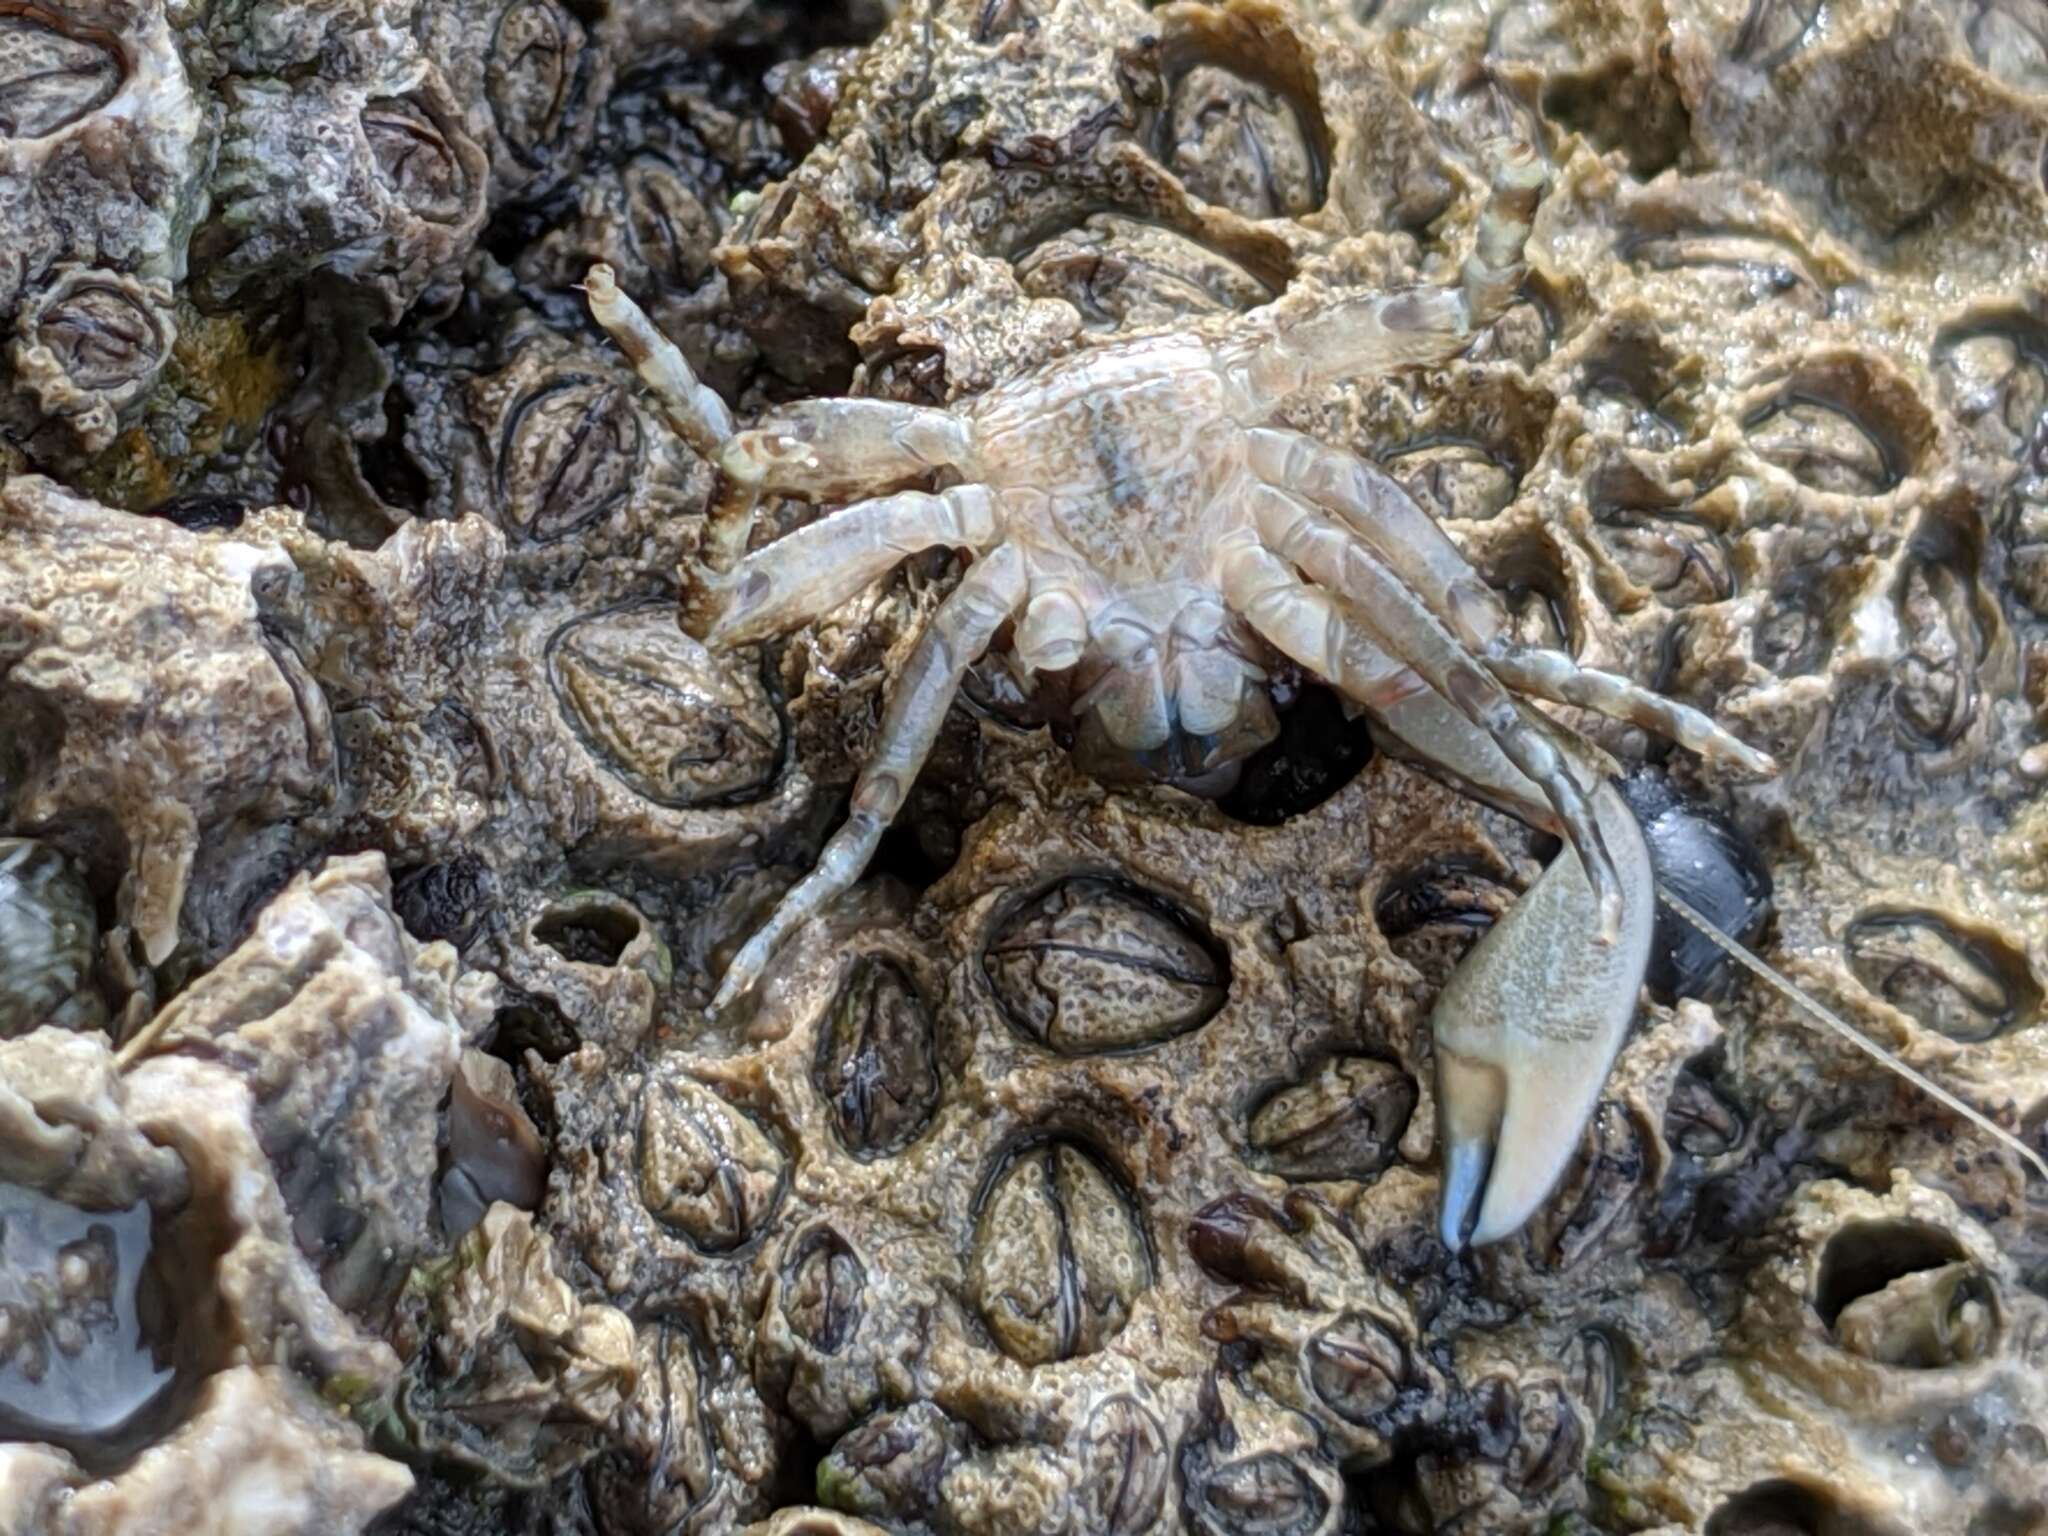 Image of chocolate porcelain crab